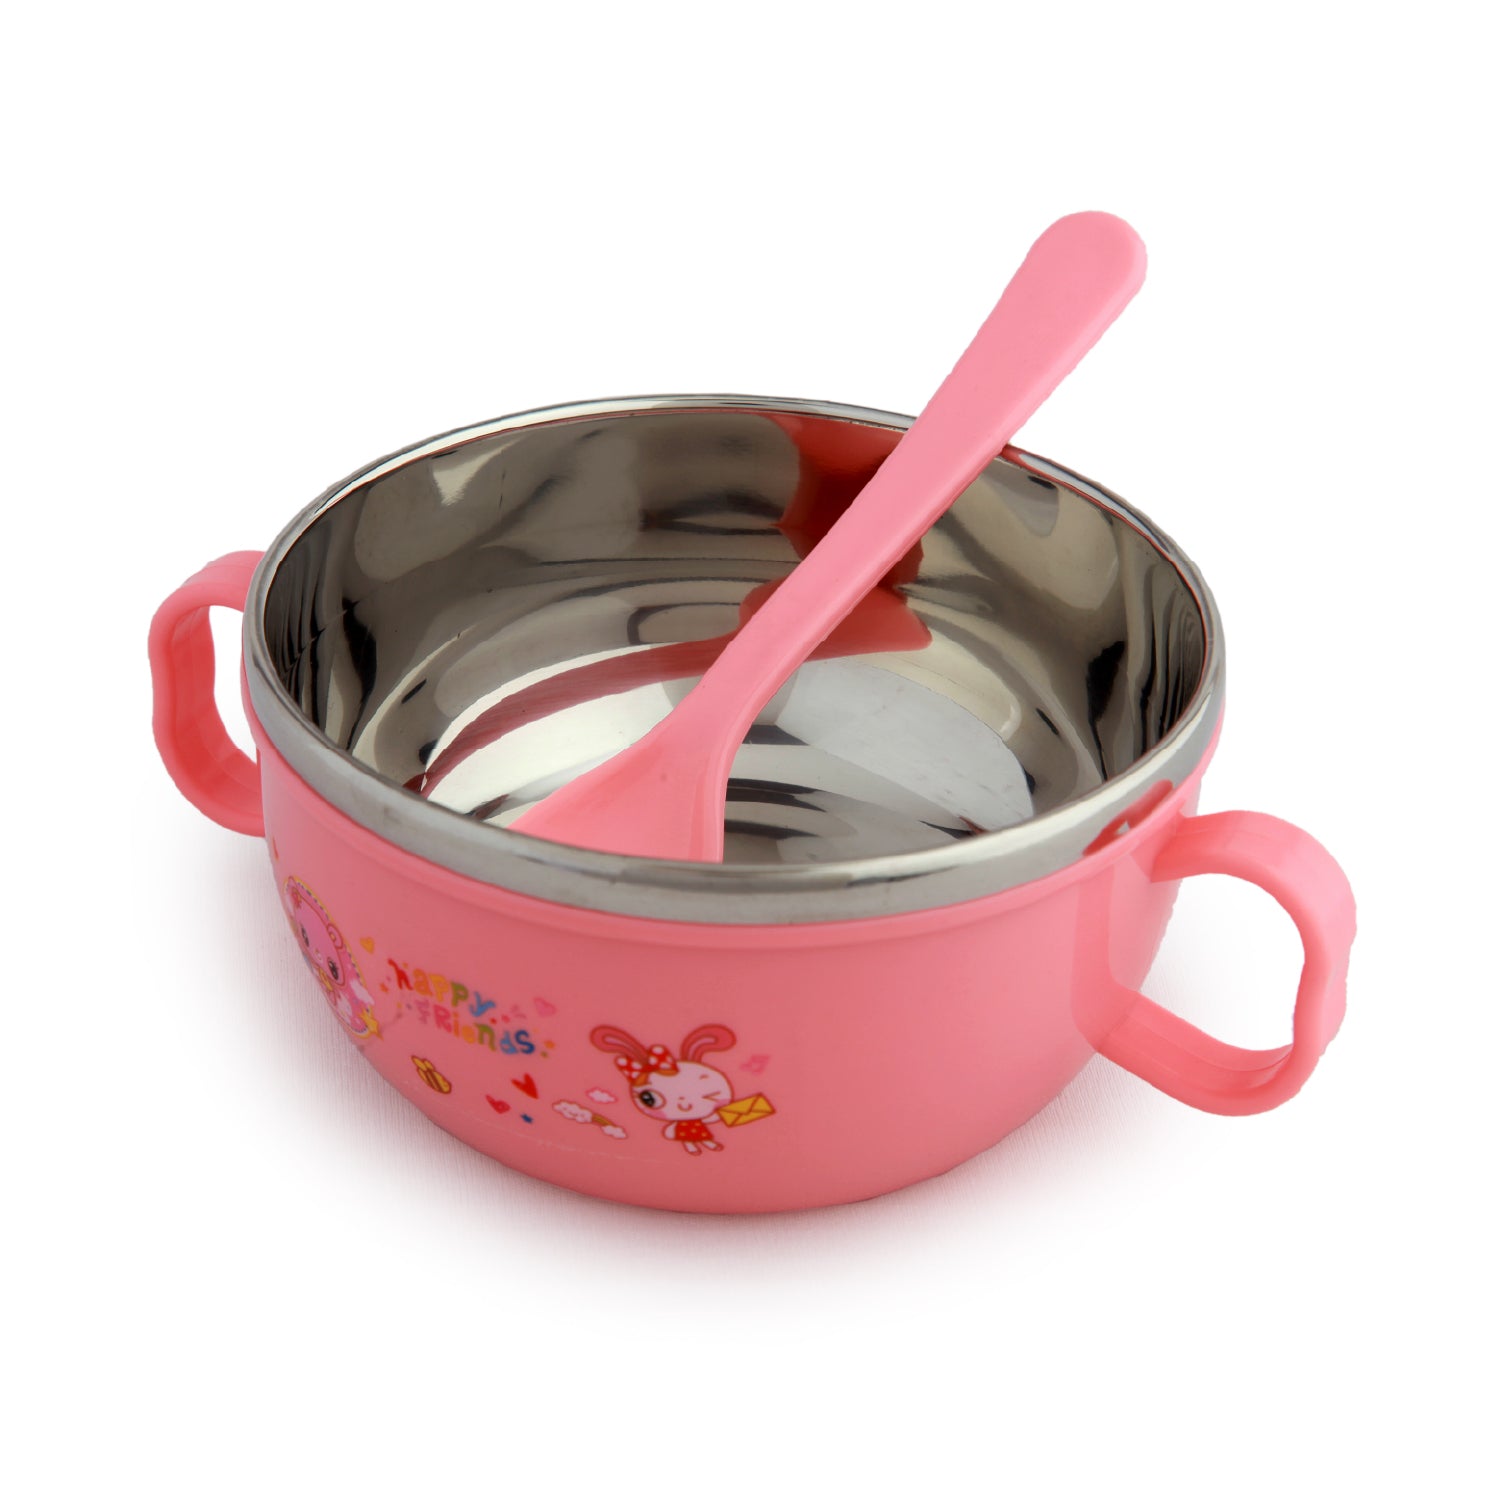 On-The-Go Pink Steel Bowl & Spoon Tiffin Set - Baby Moo